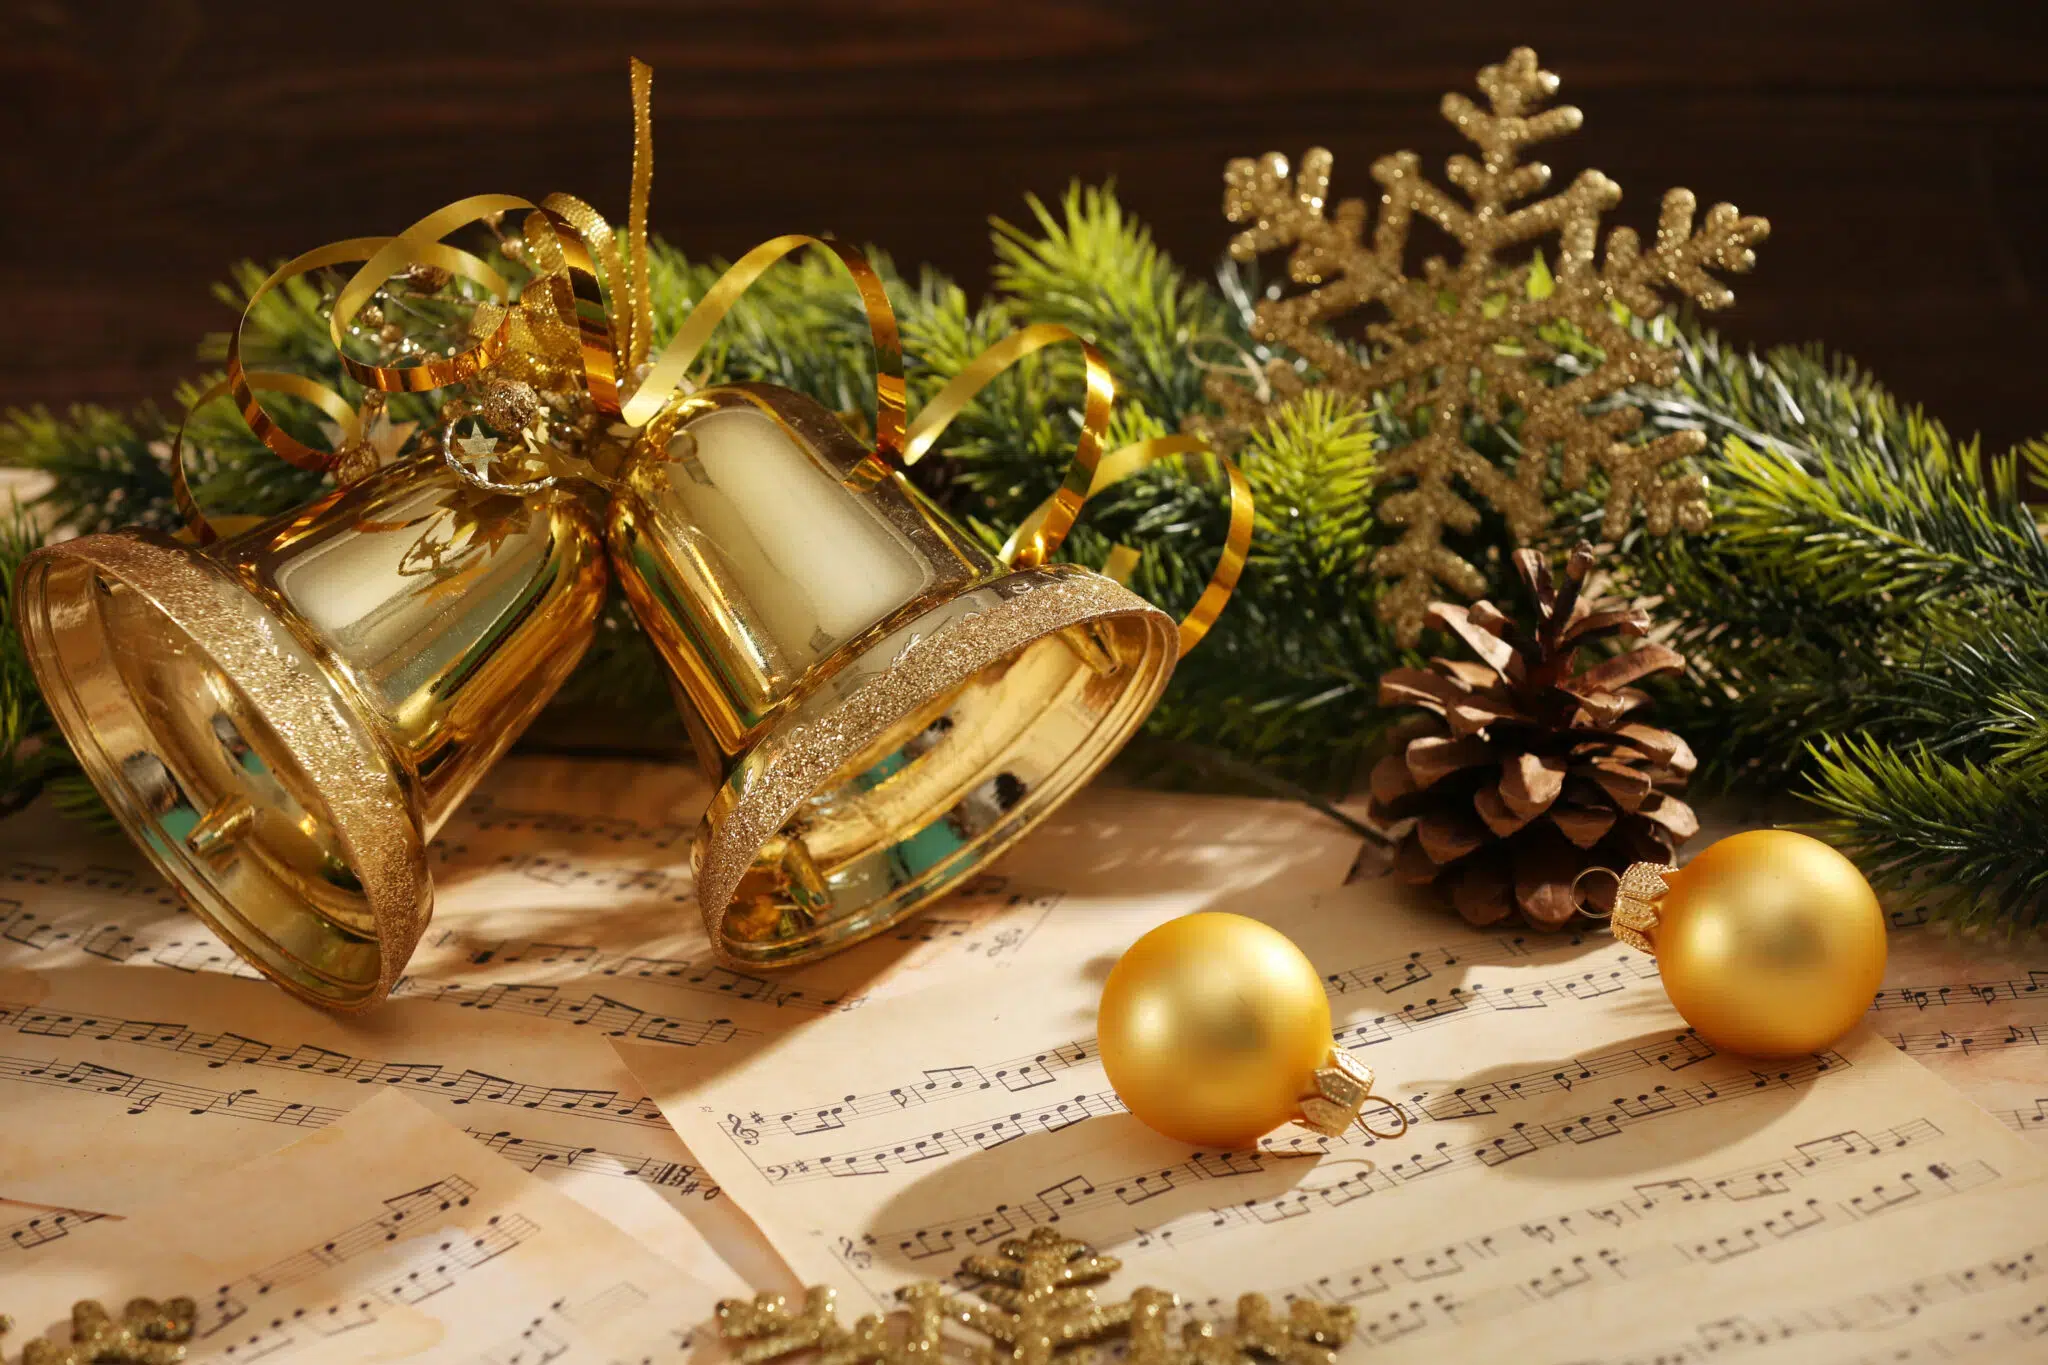 Sheet music with Christmas decorations.